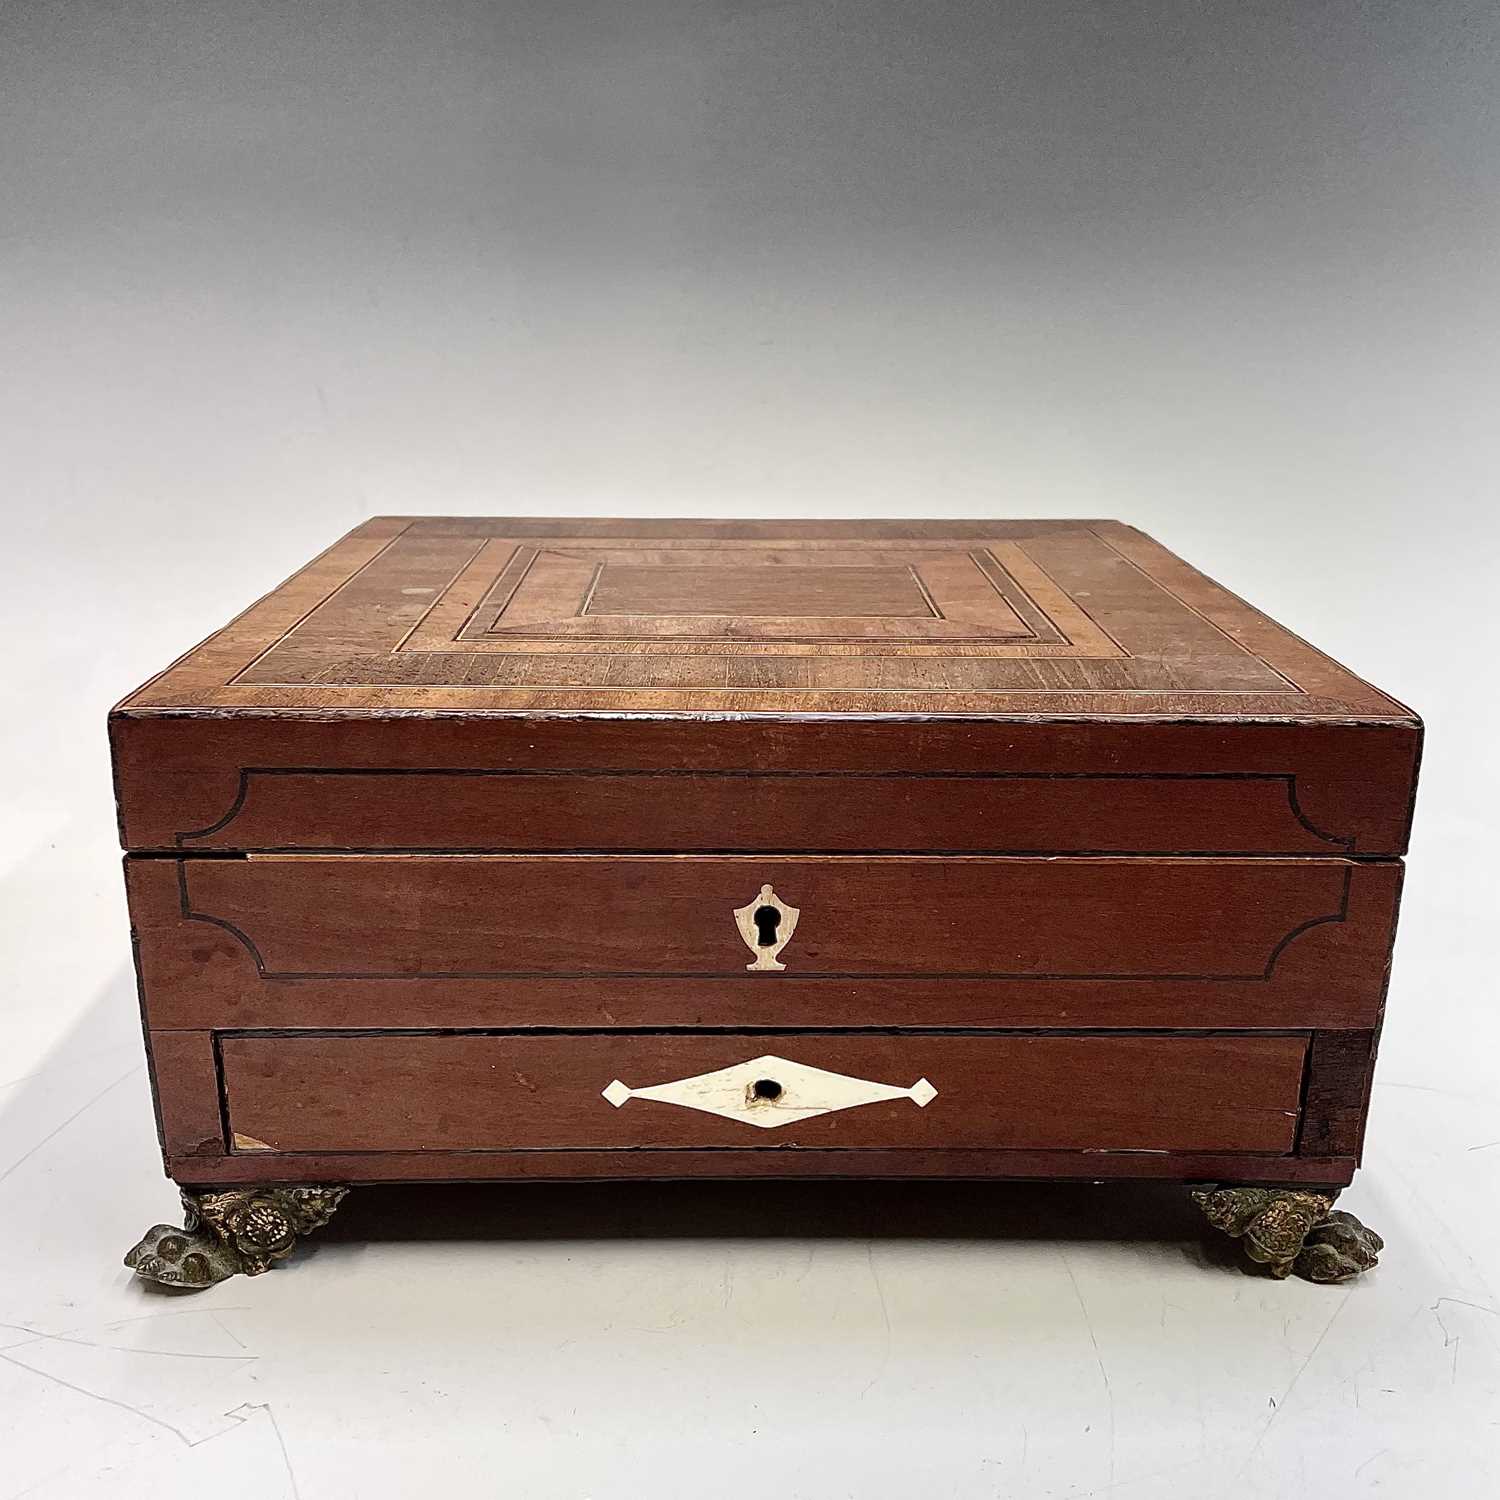 A Regency mahogany inlaid and crossbanded work box, with fitted interior and a lower drawer with